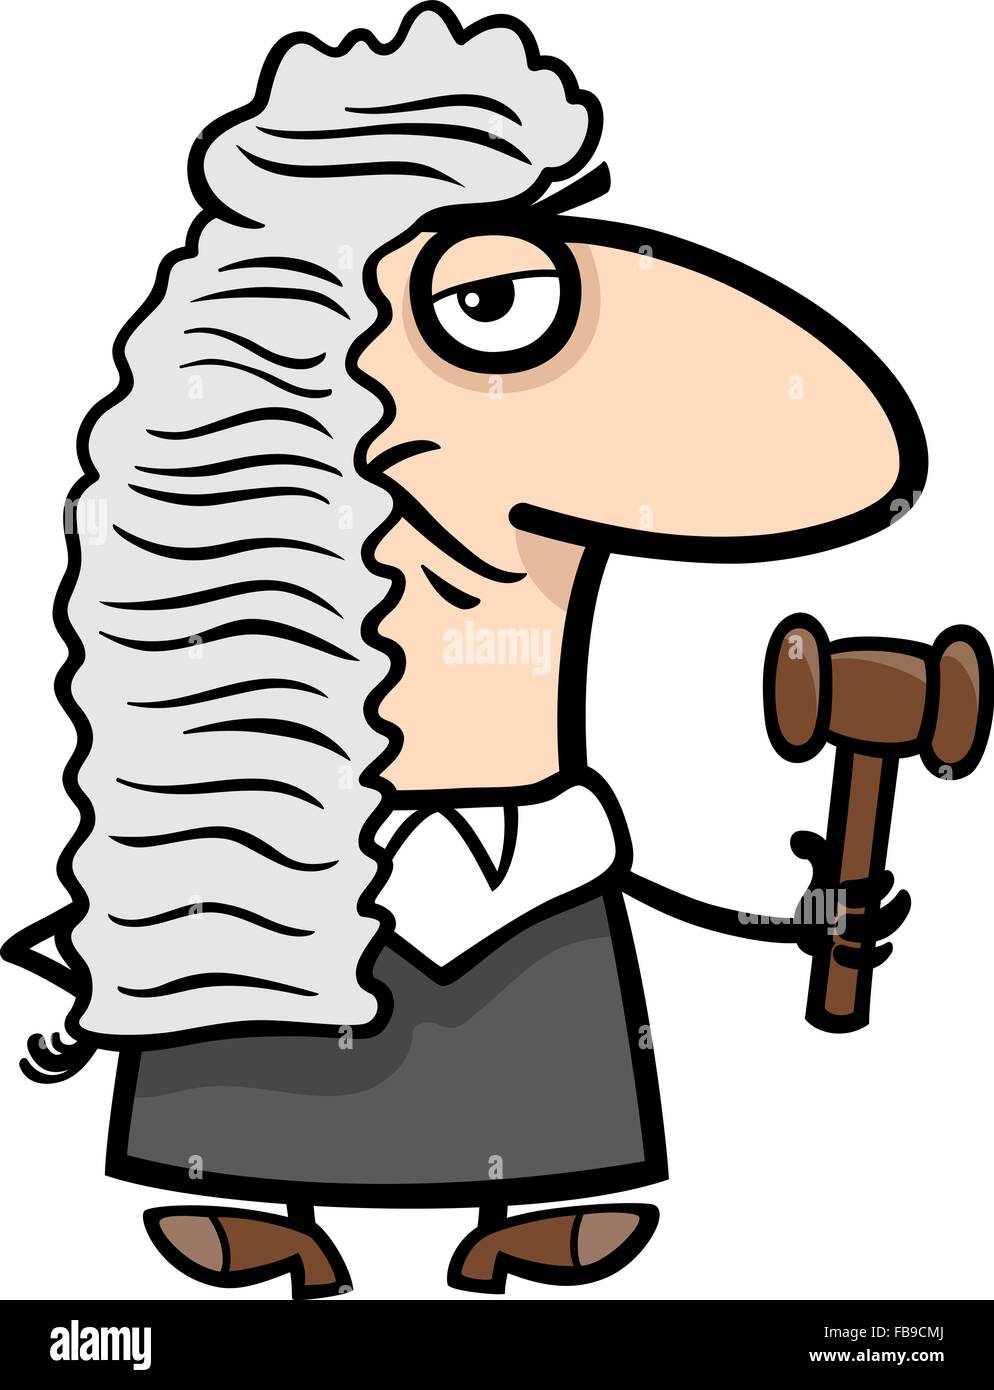 funny legal clipart - photo #1